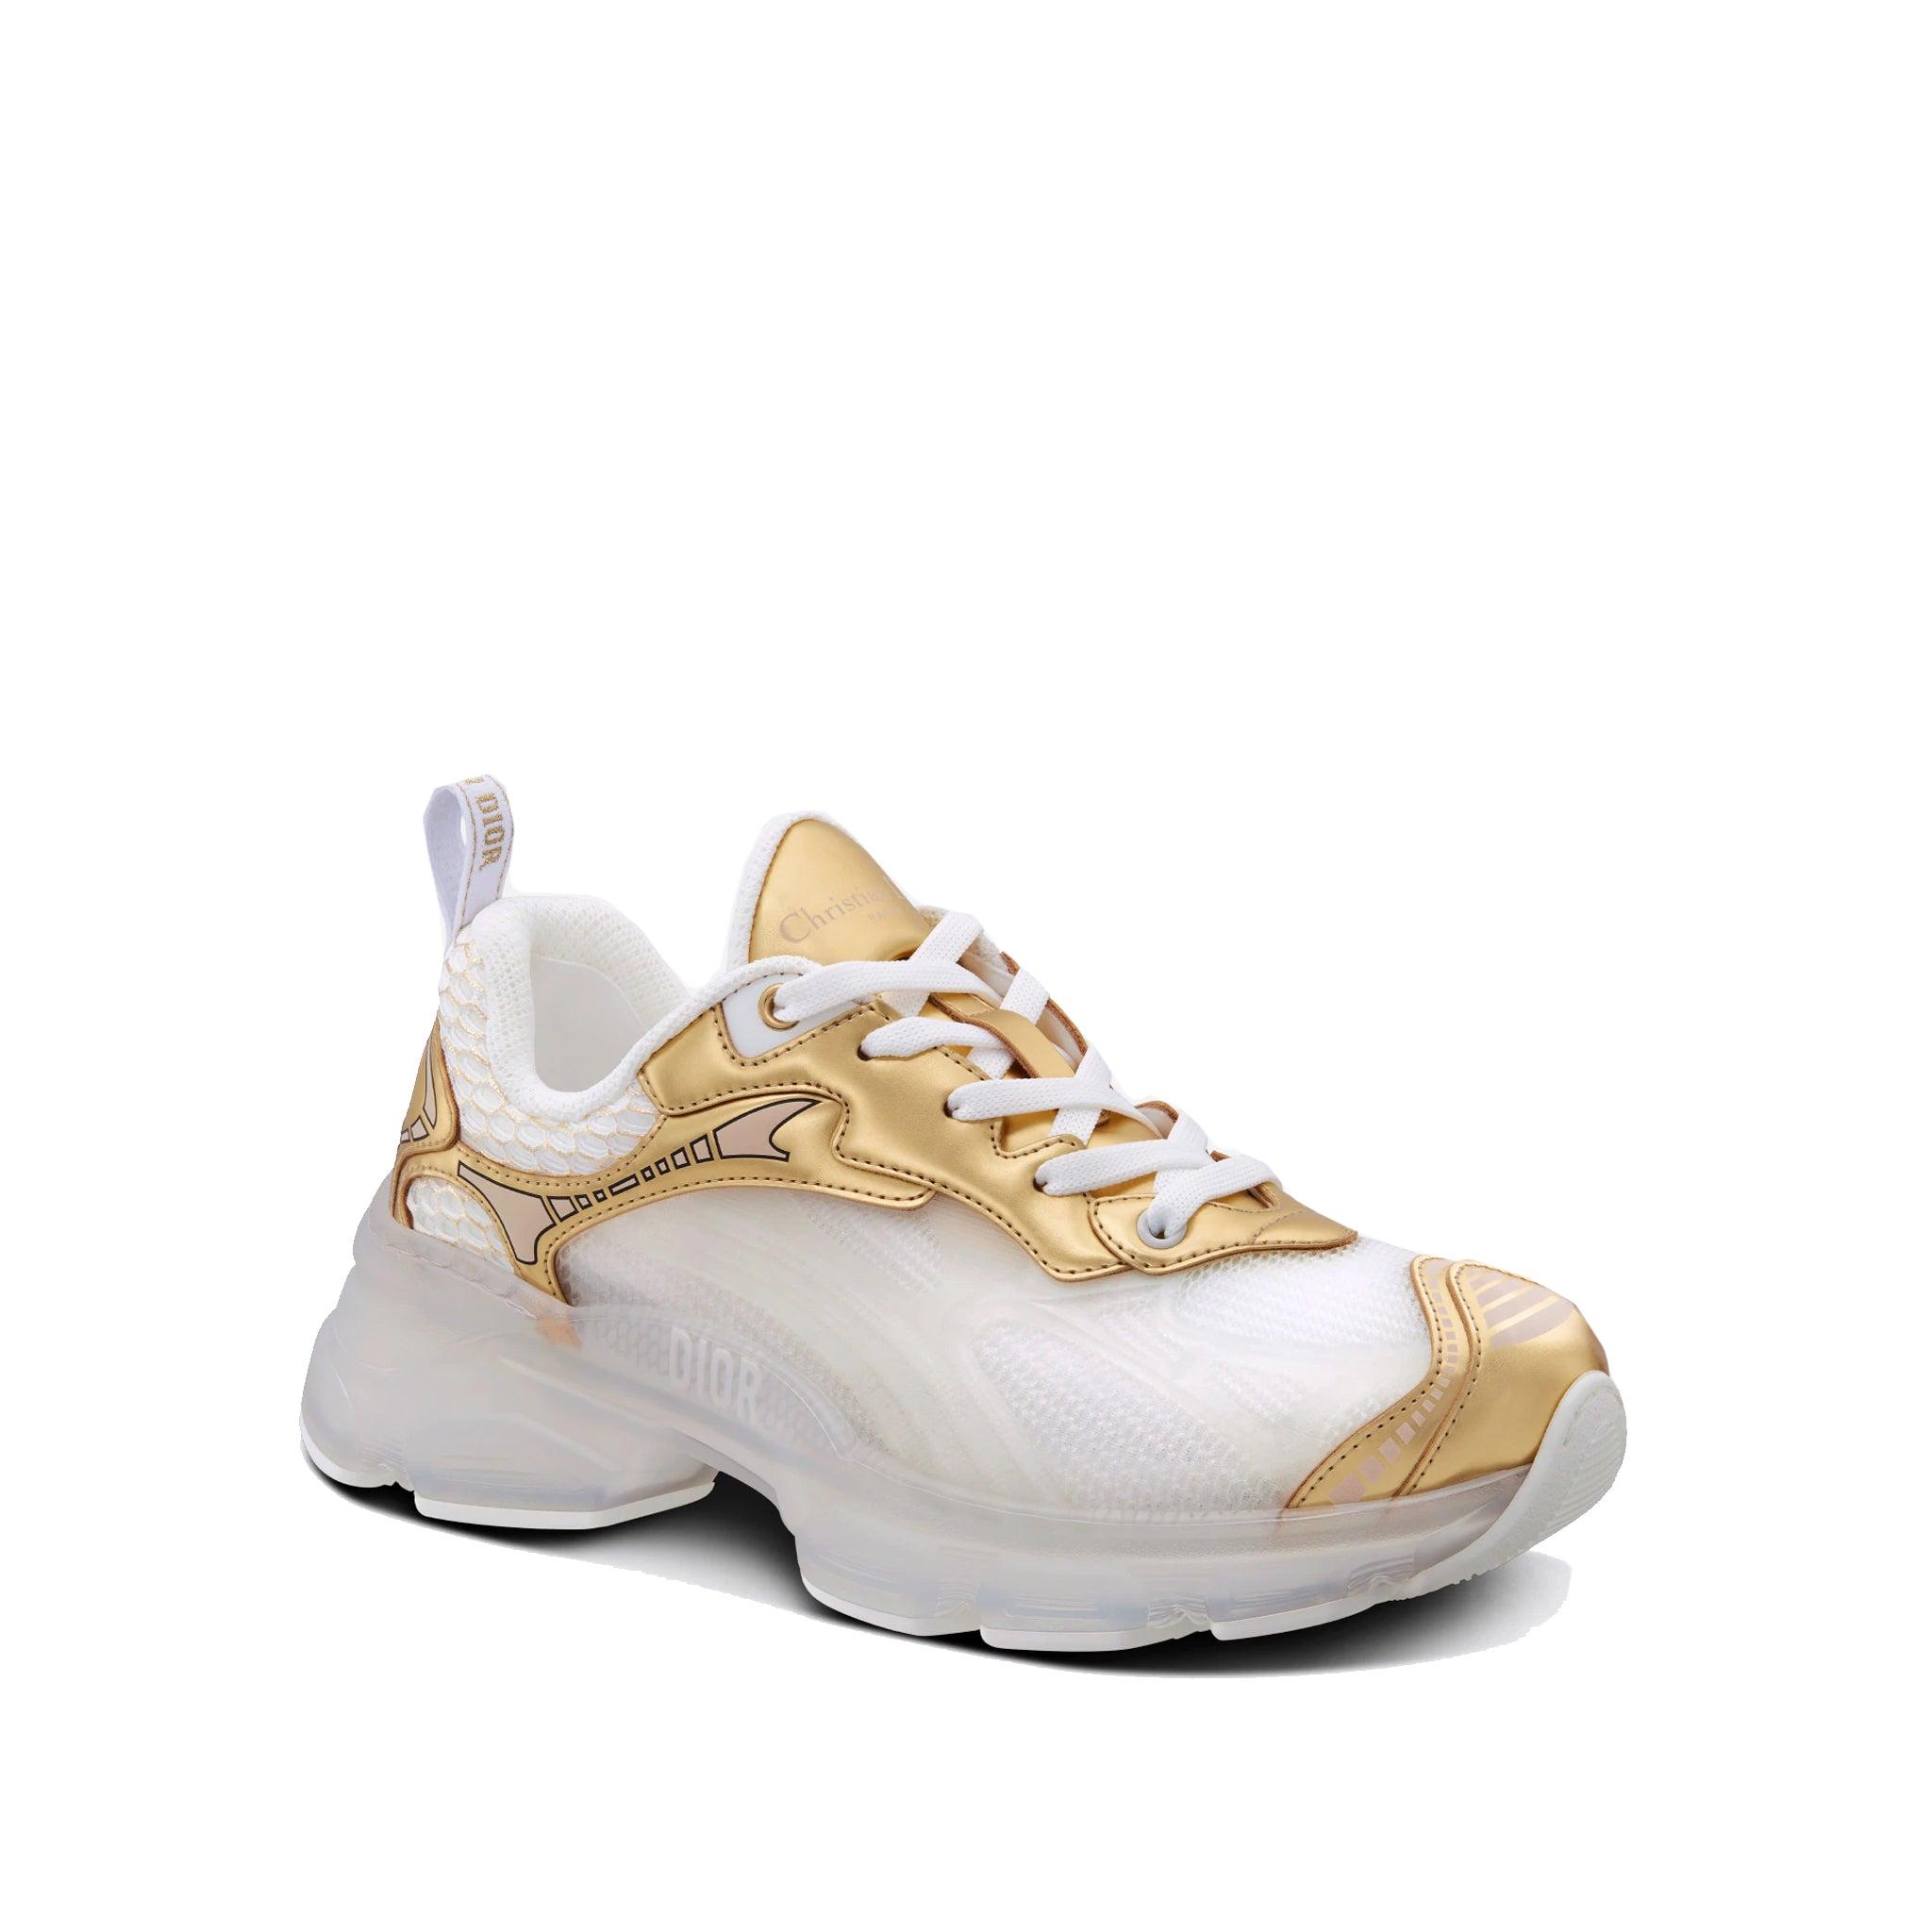 Dior Vibe Sneakers in Natural | Lyst